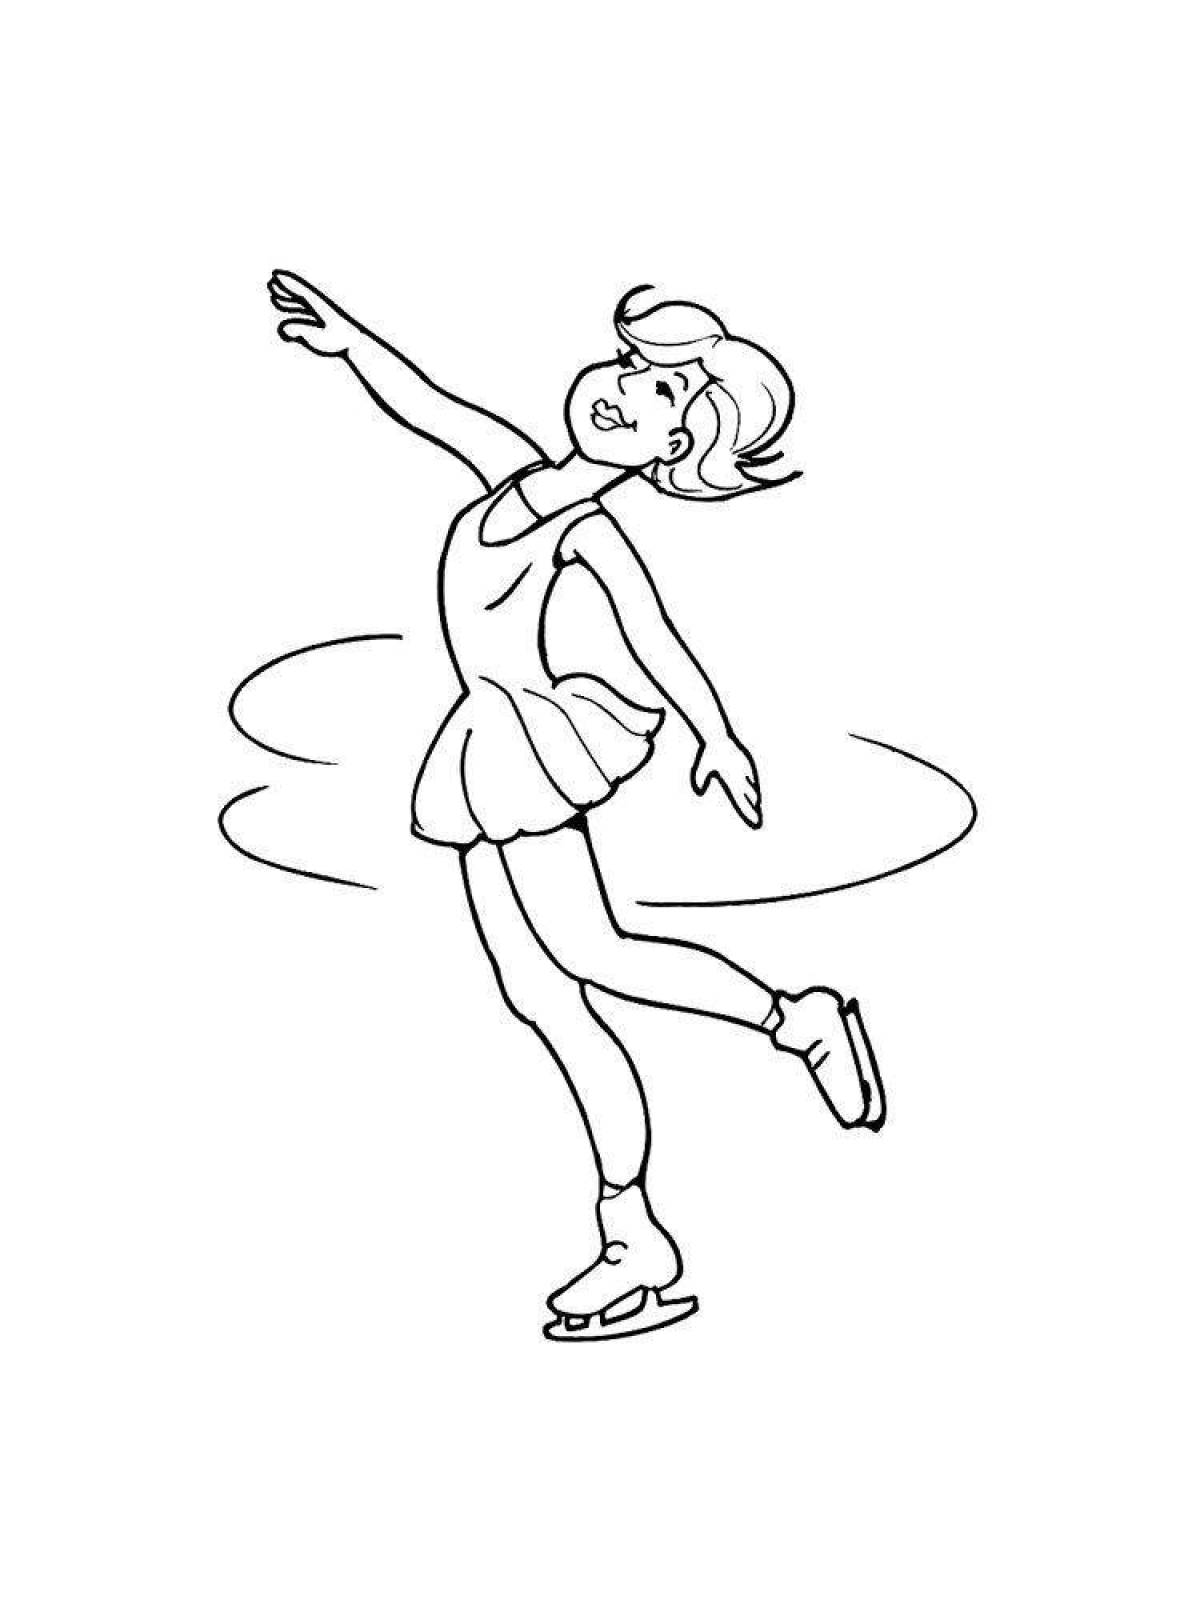 Exquisite figure skating coloring book for kids